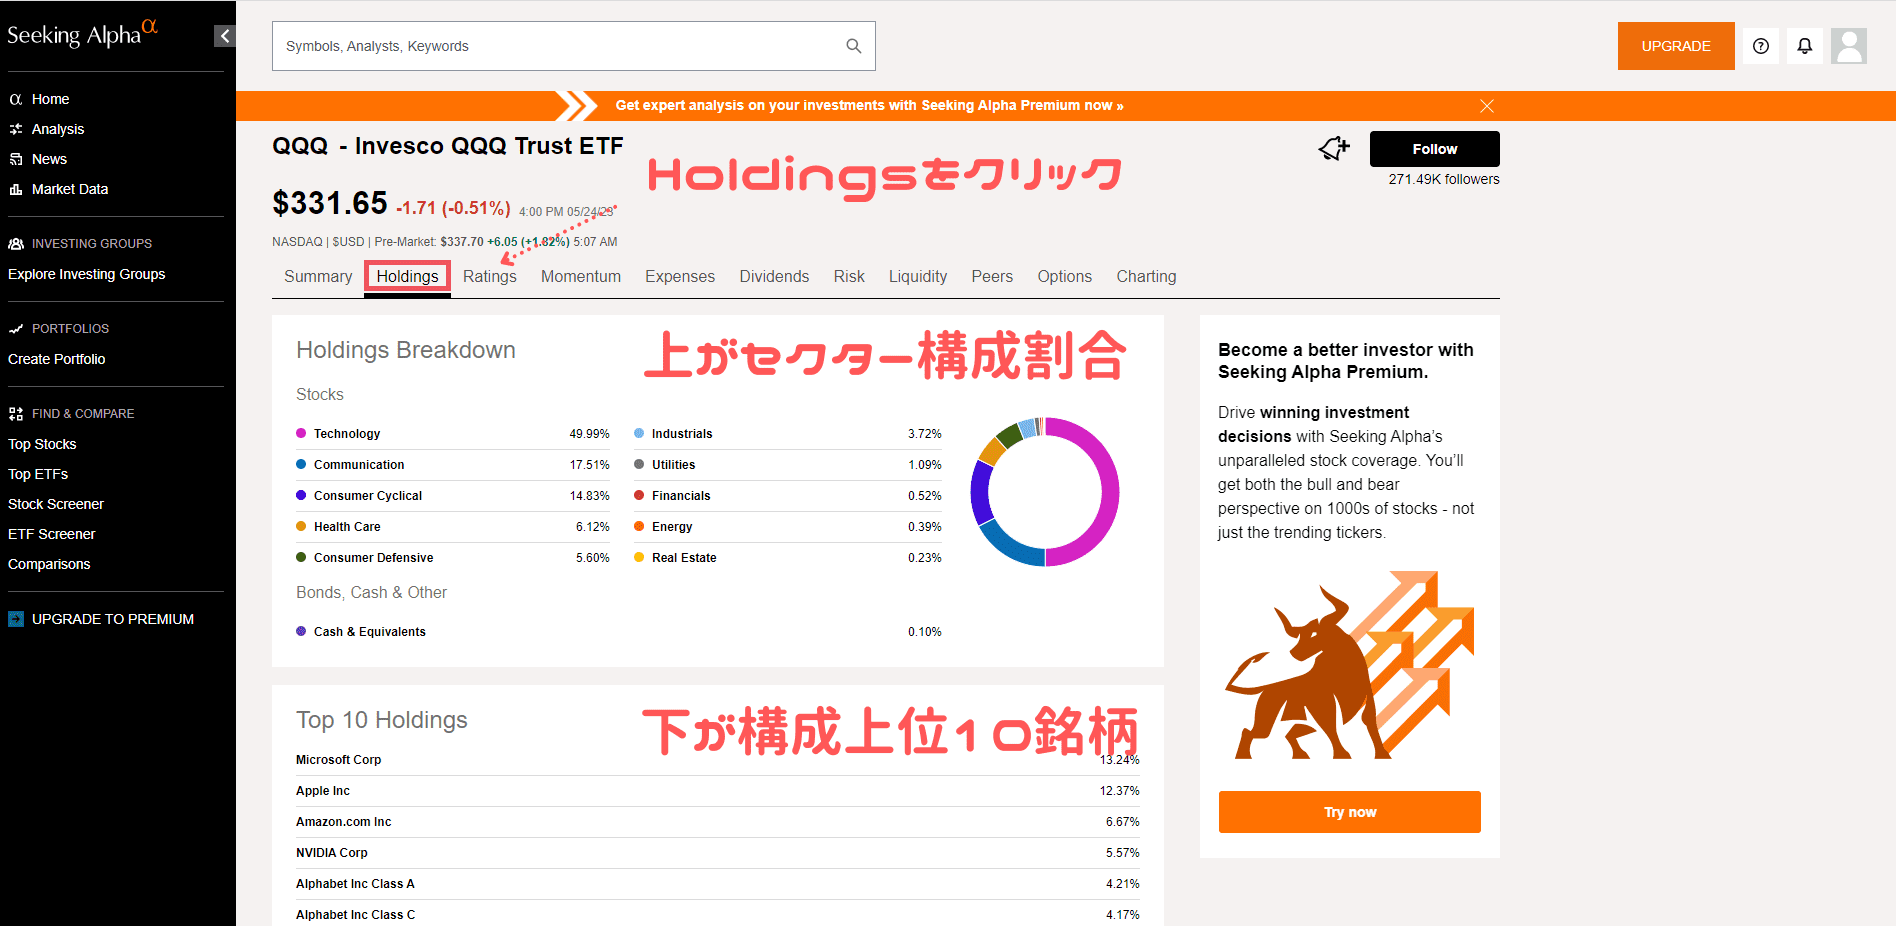 Holdingsタブ